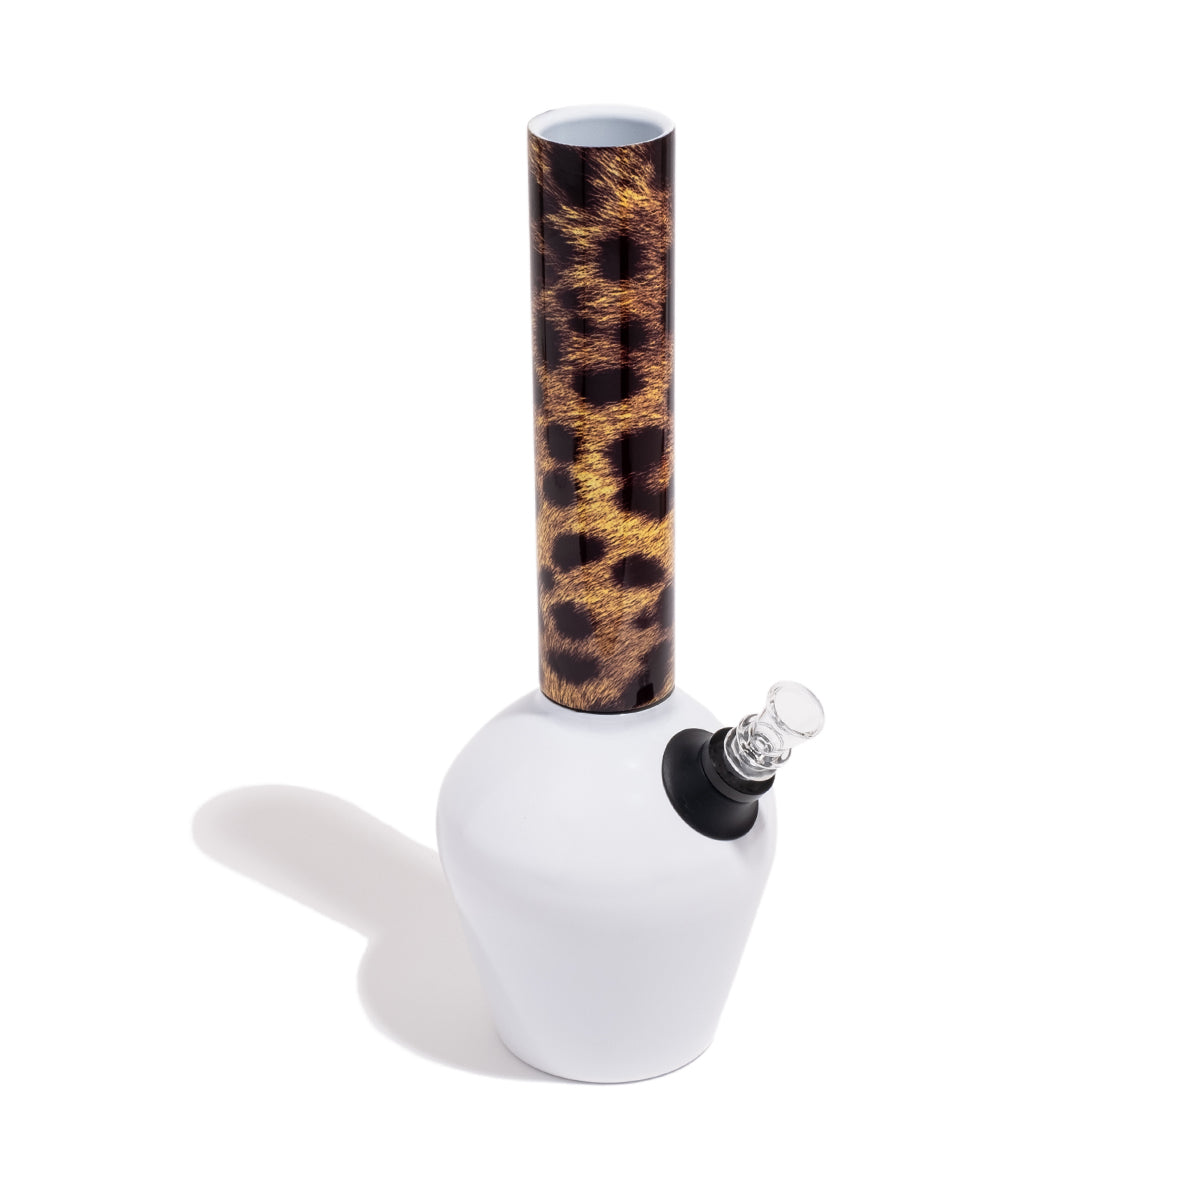 Chill - Gloss White Base with Leopard Print Tube - Durable Steel Bong Accessory